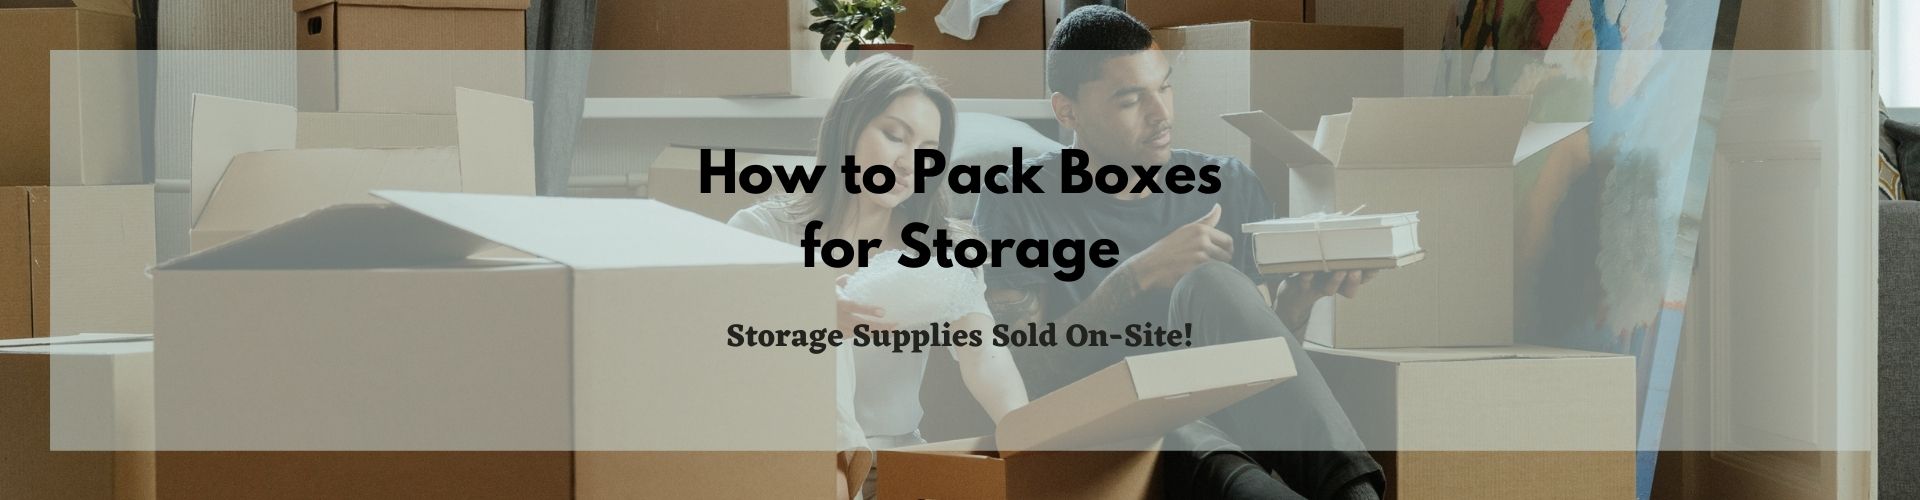 how to pack a storage unit